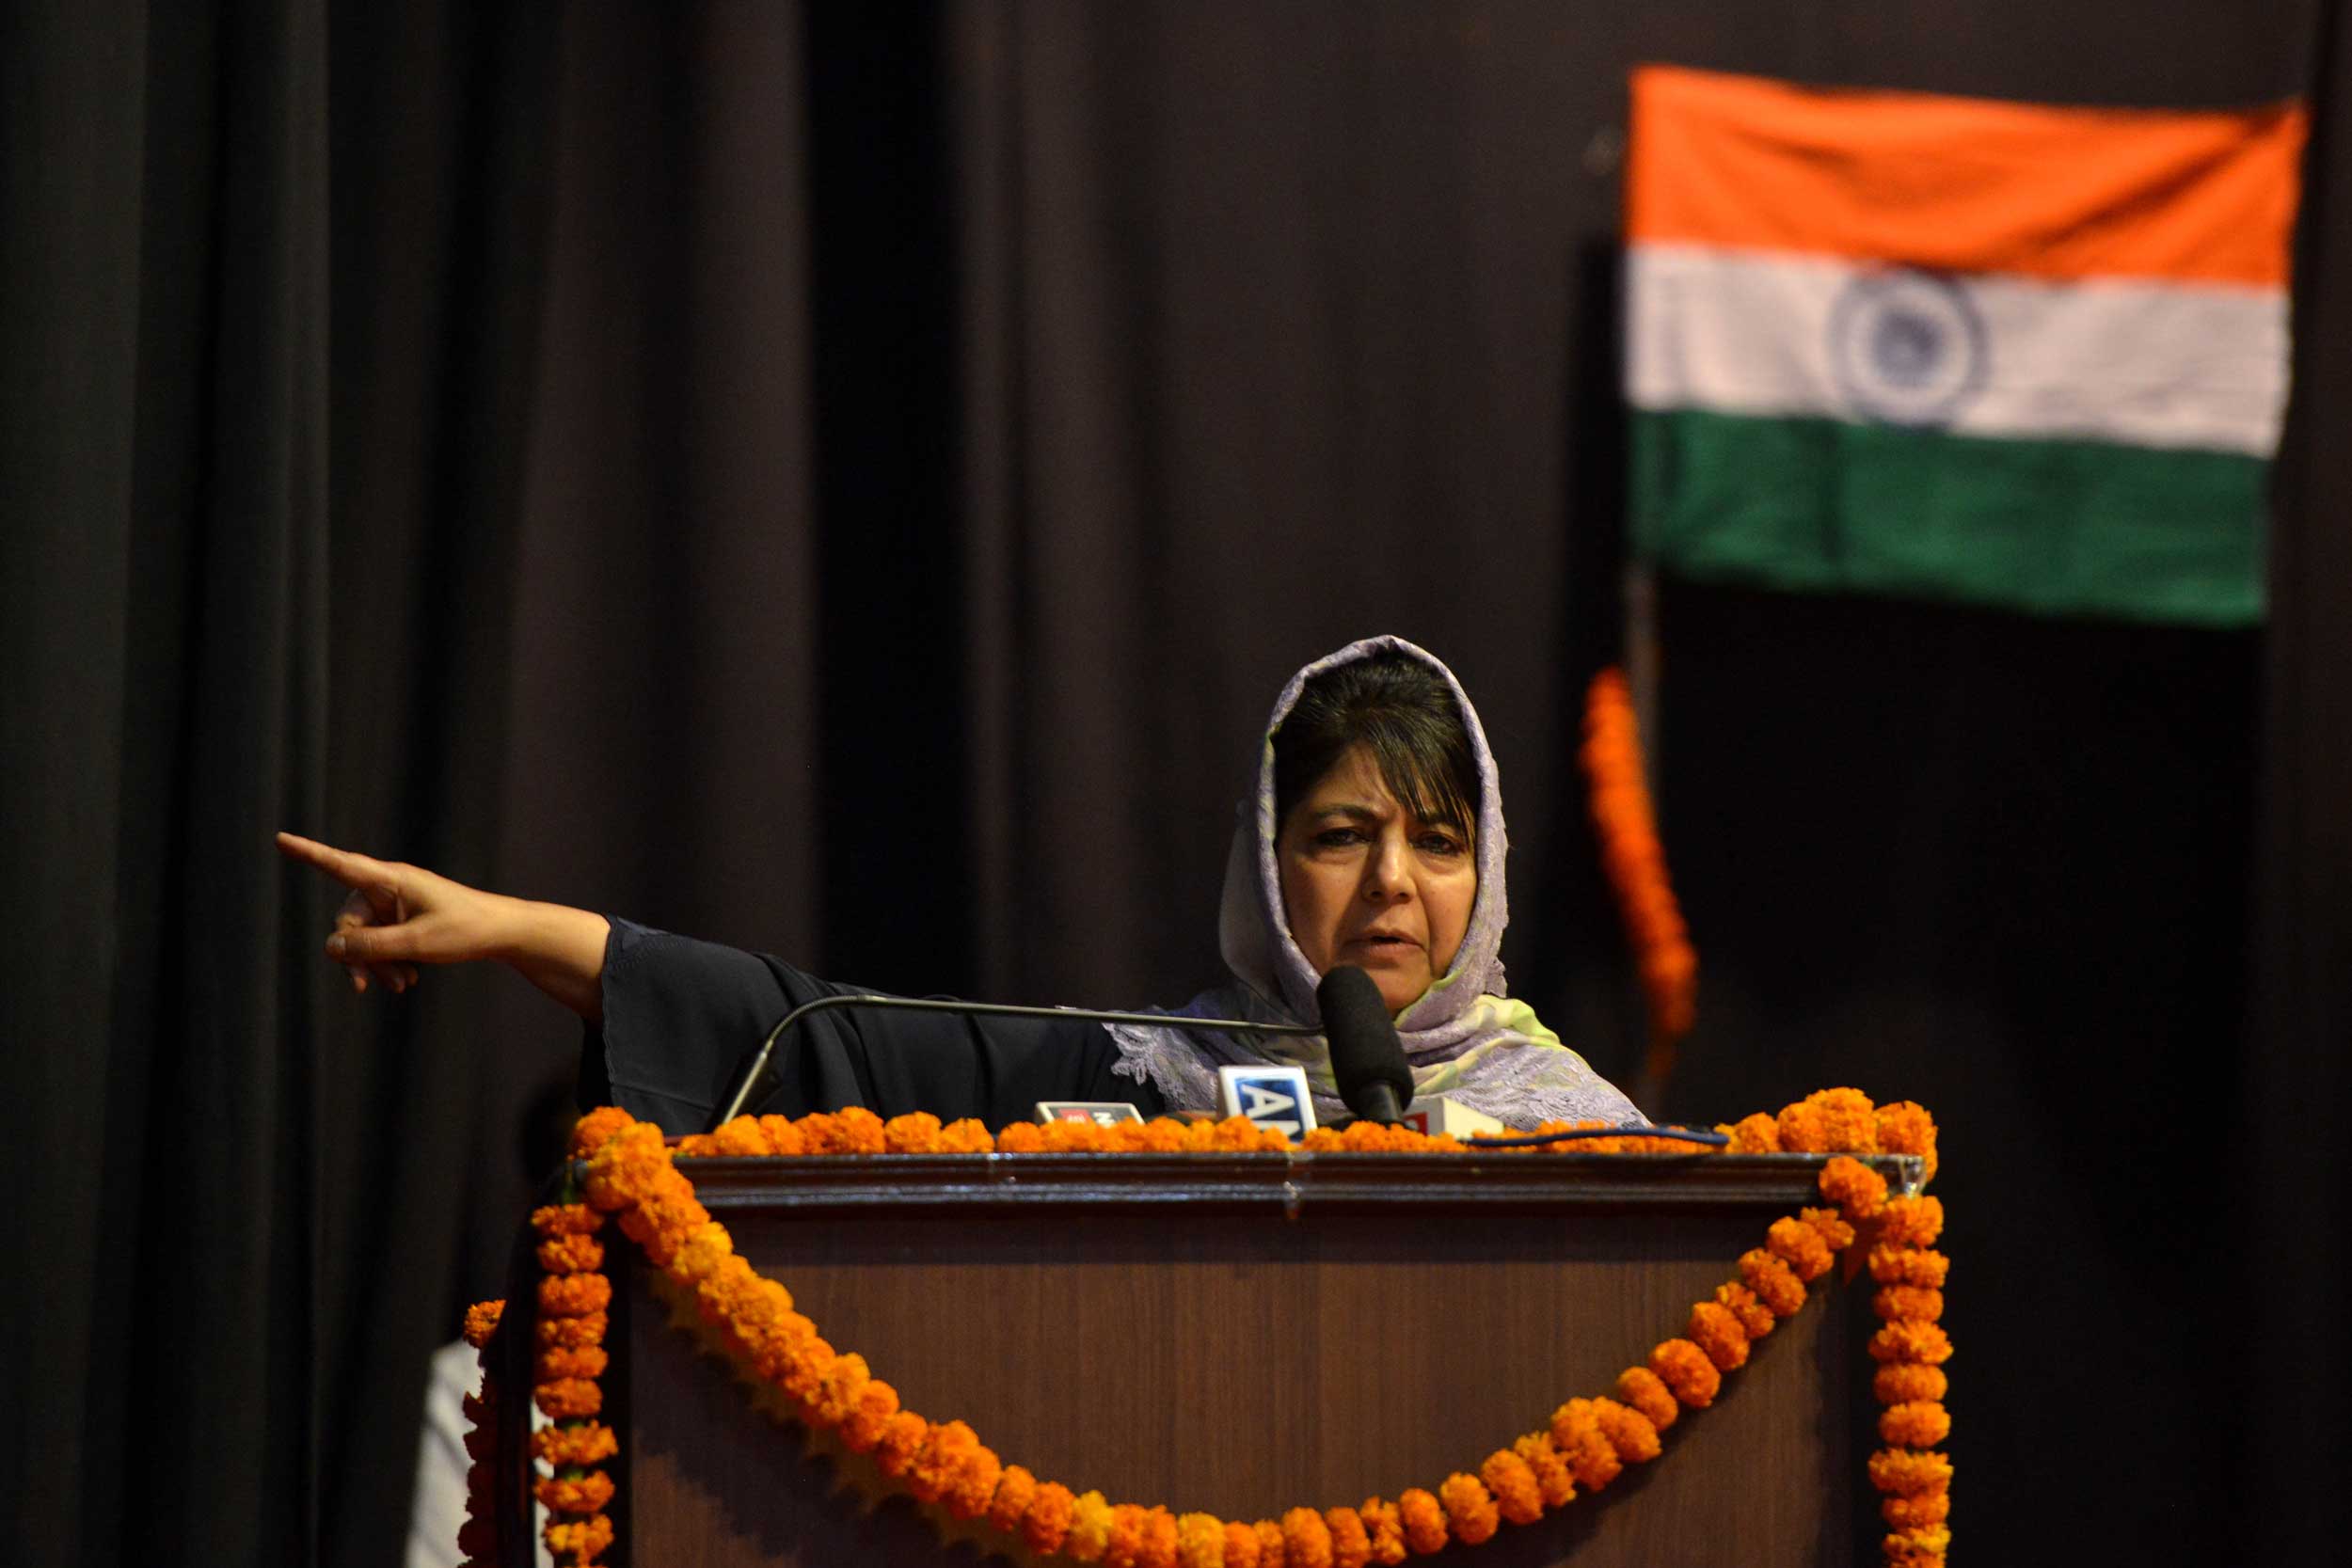 Mehbooba Mufti urged people to defy the lockdown. “You cannot crush Kashmiris like this. This is our state, these are our roads, we can go to wherever we like on these roads. Our children have to go on foot to appear in exams. I urge people to defy the ban and go wherever they want,” she said.